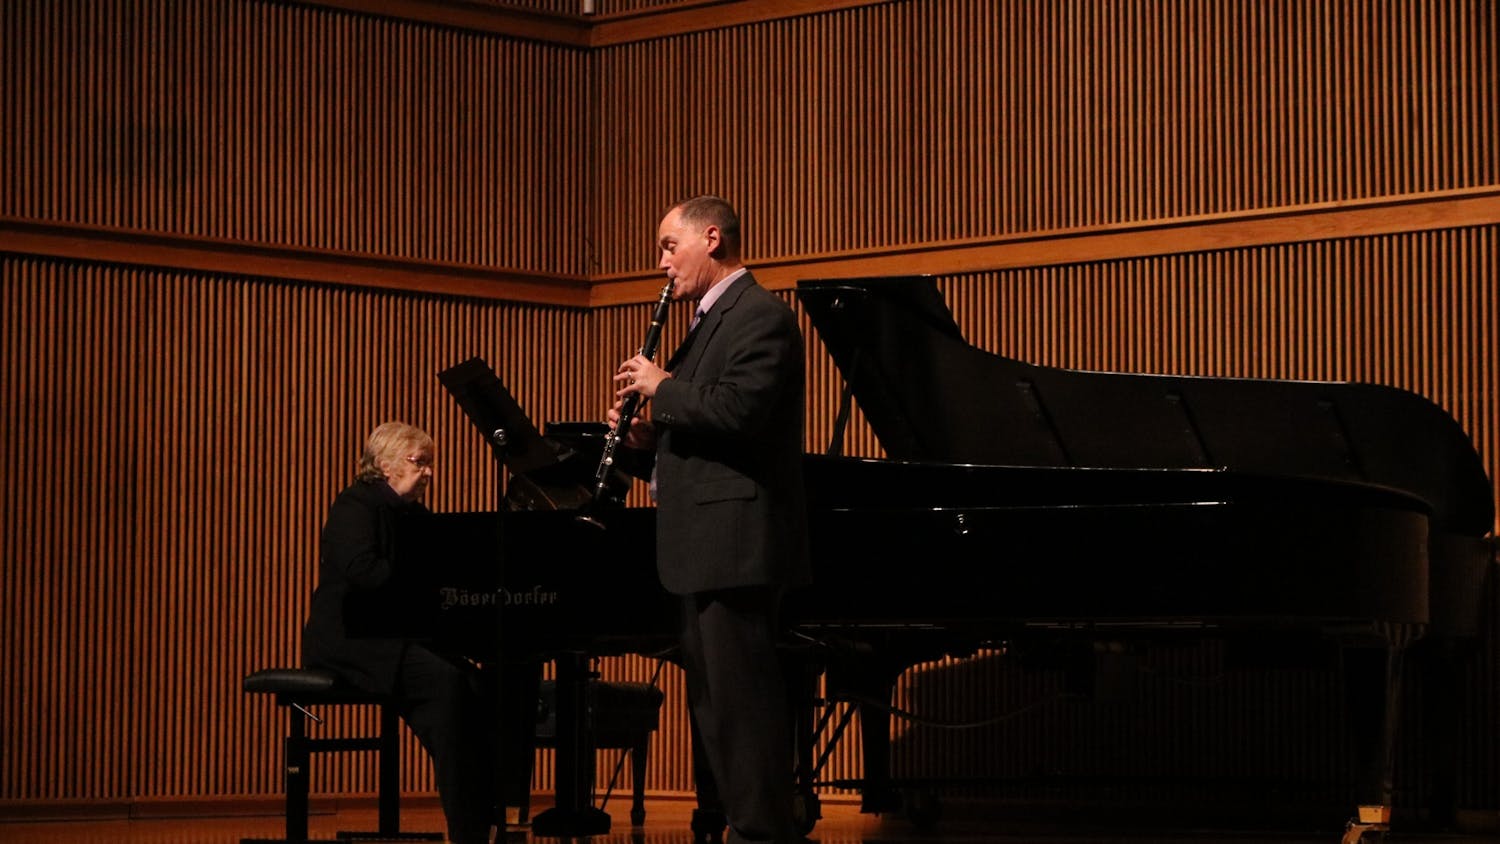 Professor of Music Christopher Bade performed a clarinet solo at the showcase